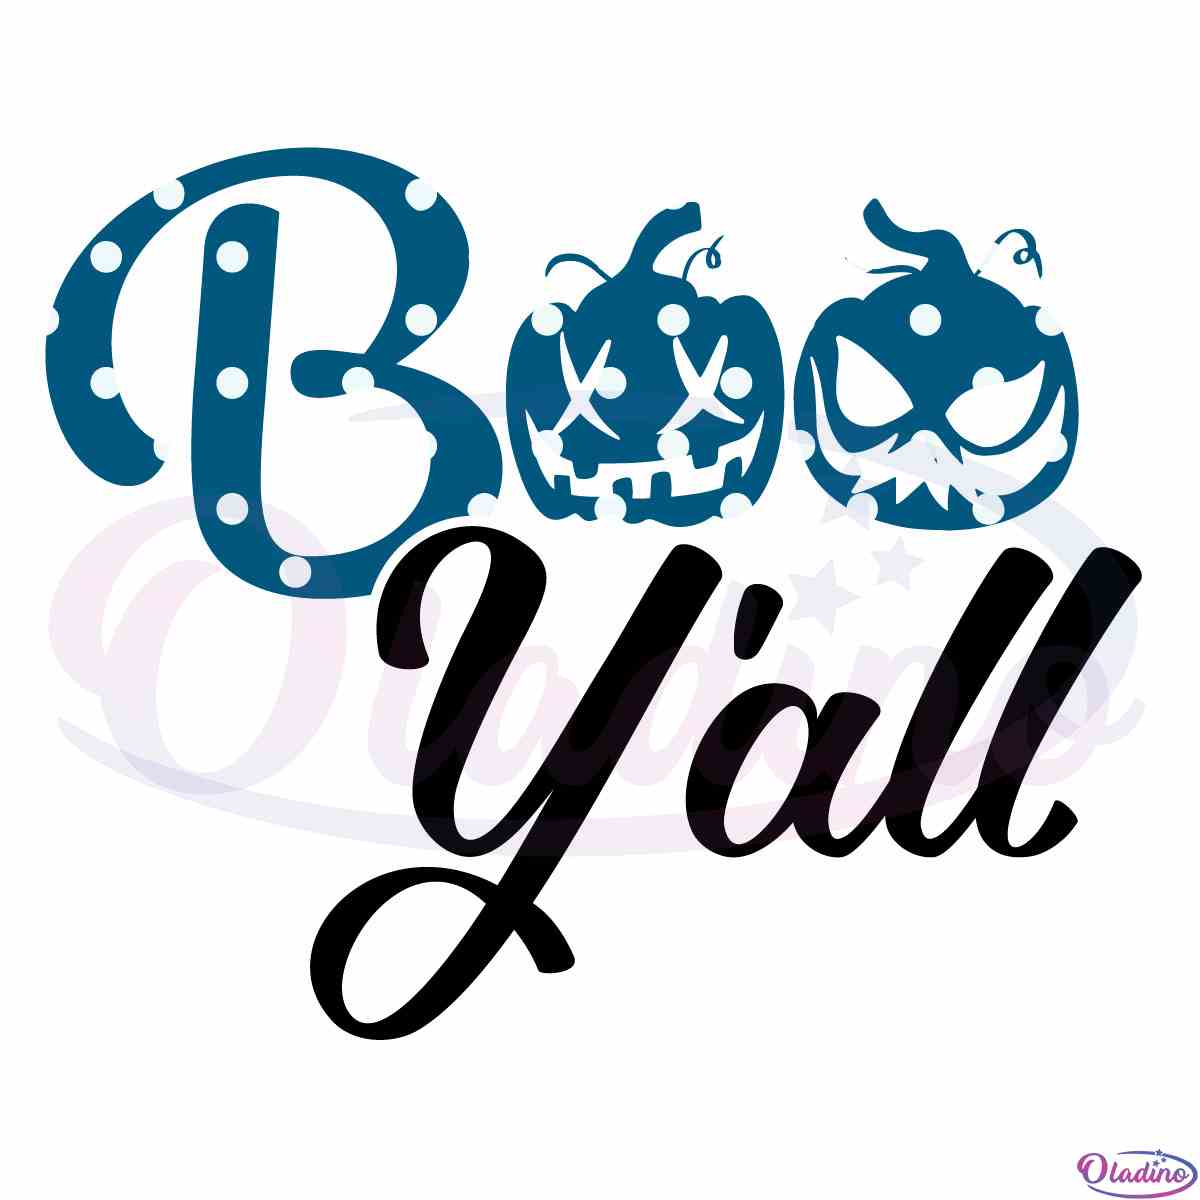 halloween-boo-yall-blue-polka-svg-best-graphic-designs-cutting-files